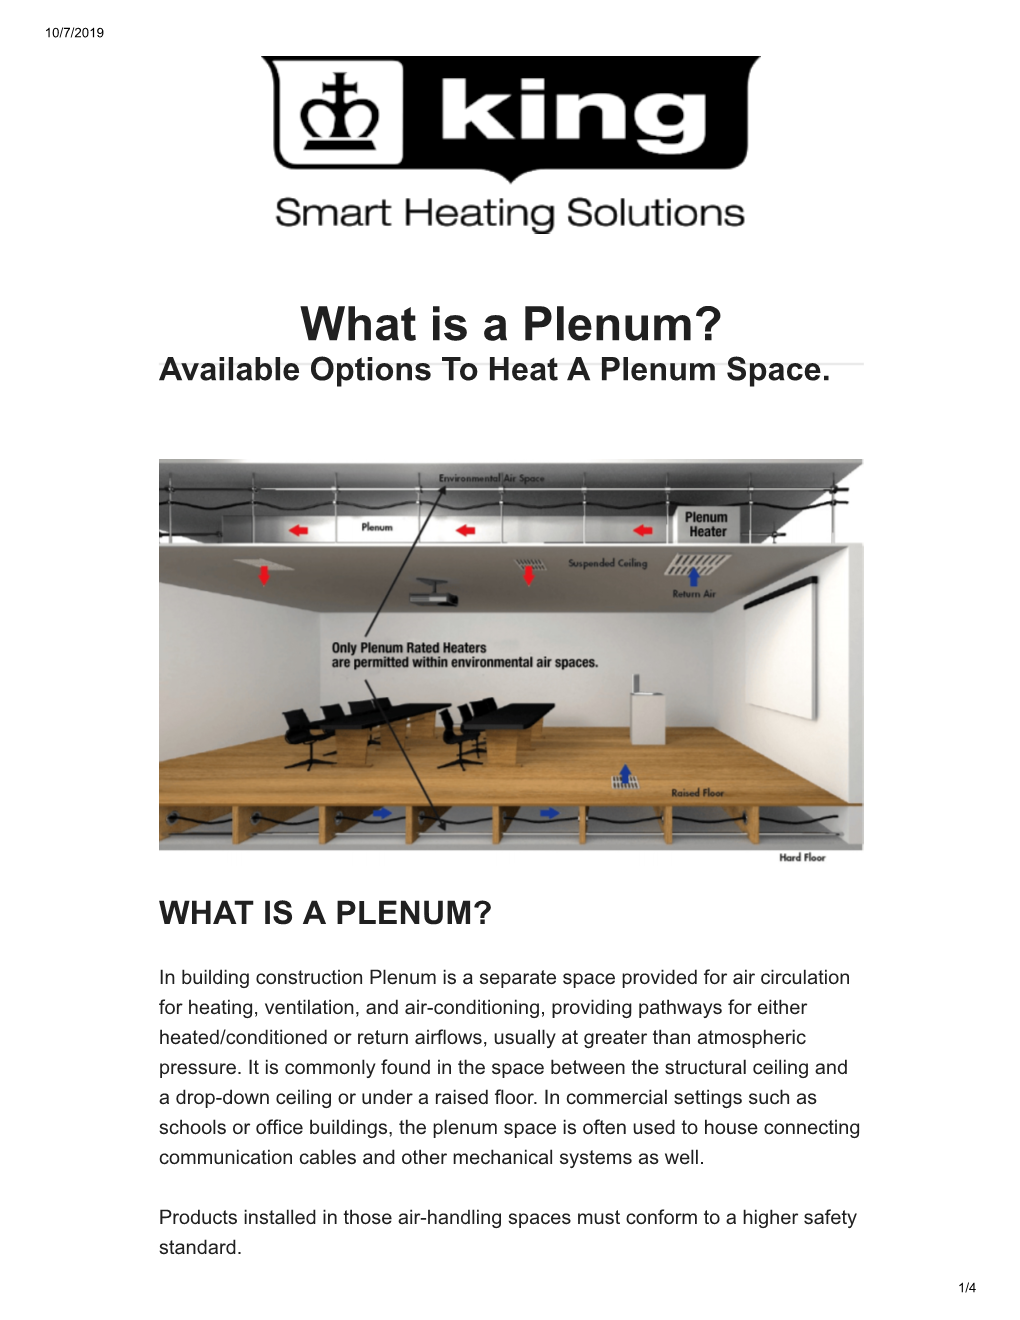 What Is a Plenum? Available Options to Heat a Plenum Space